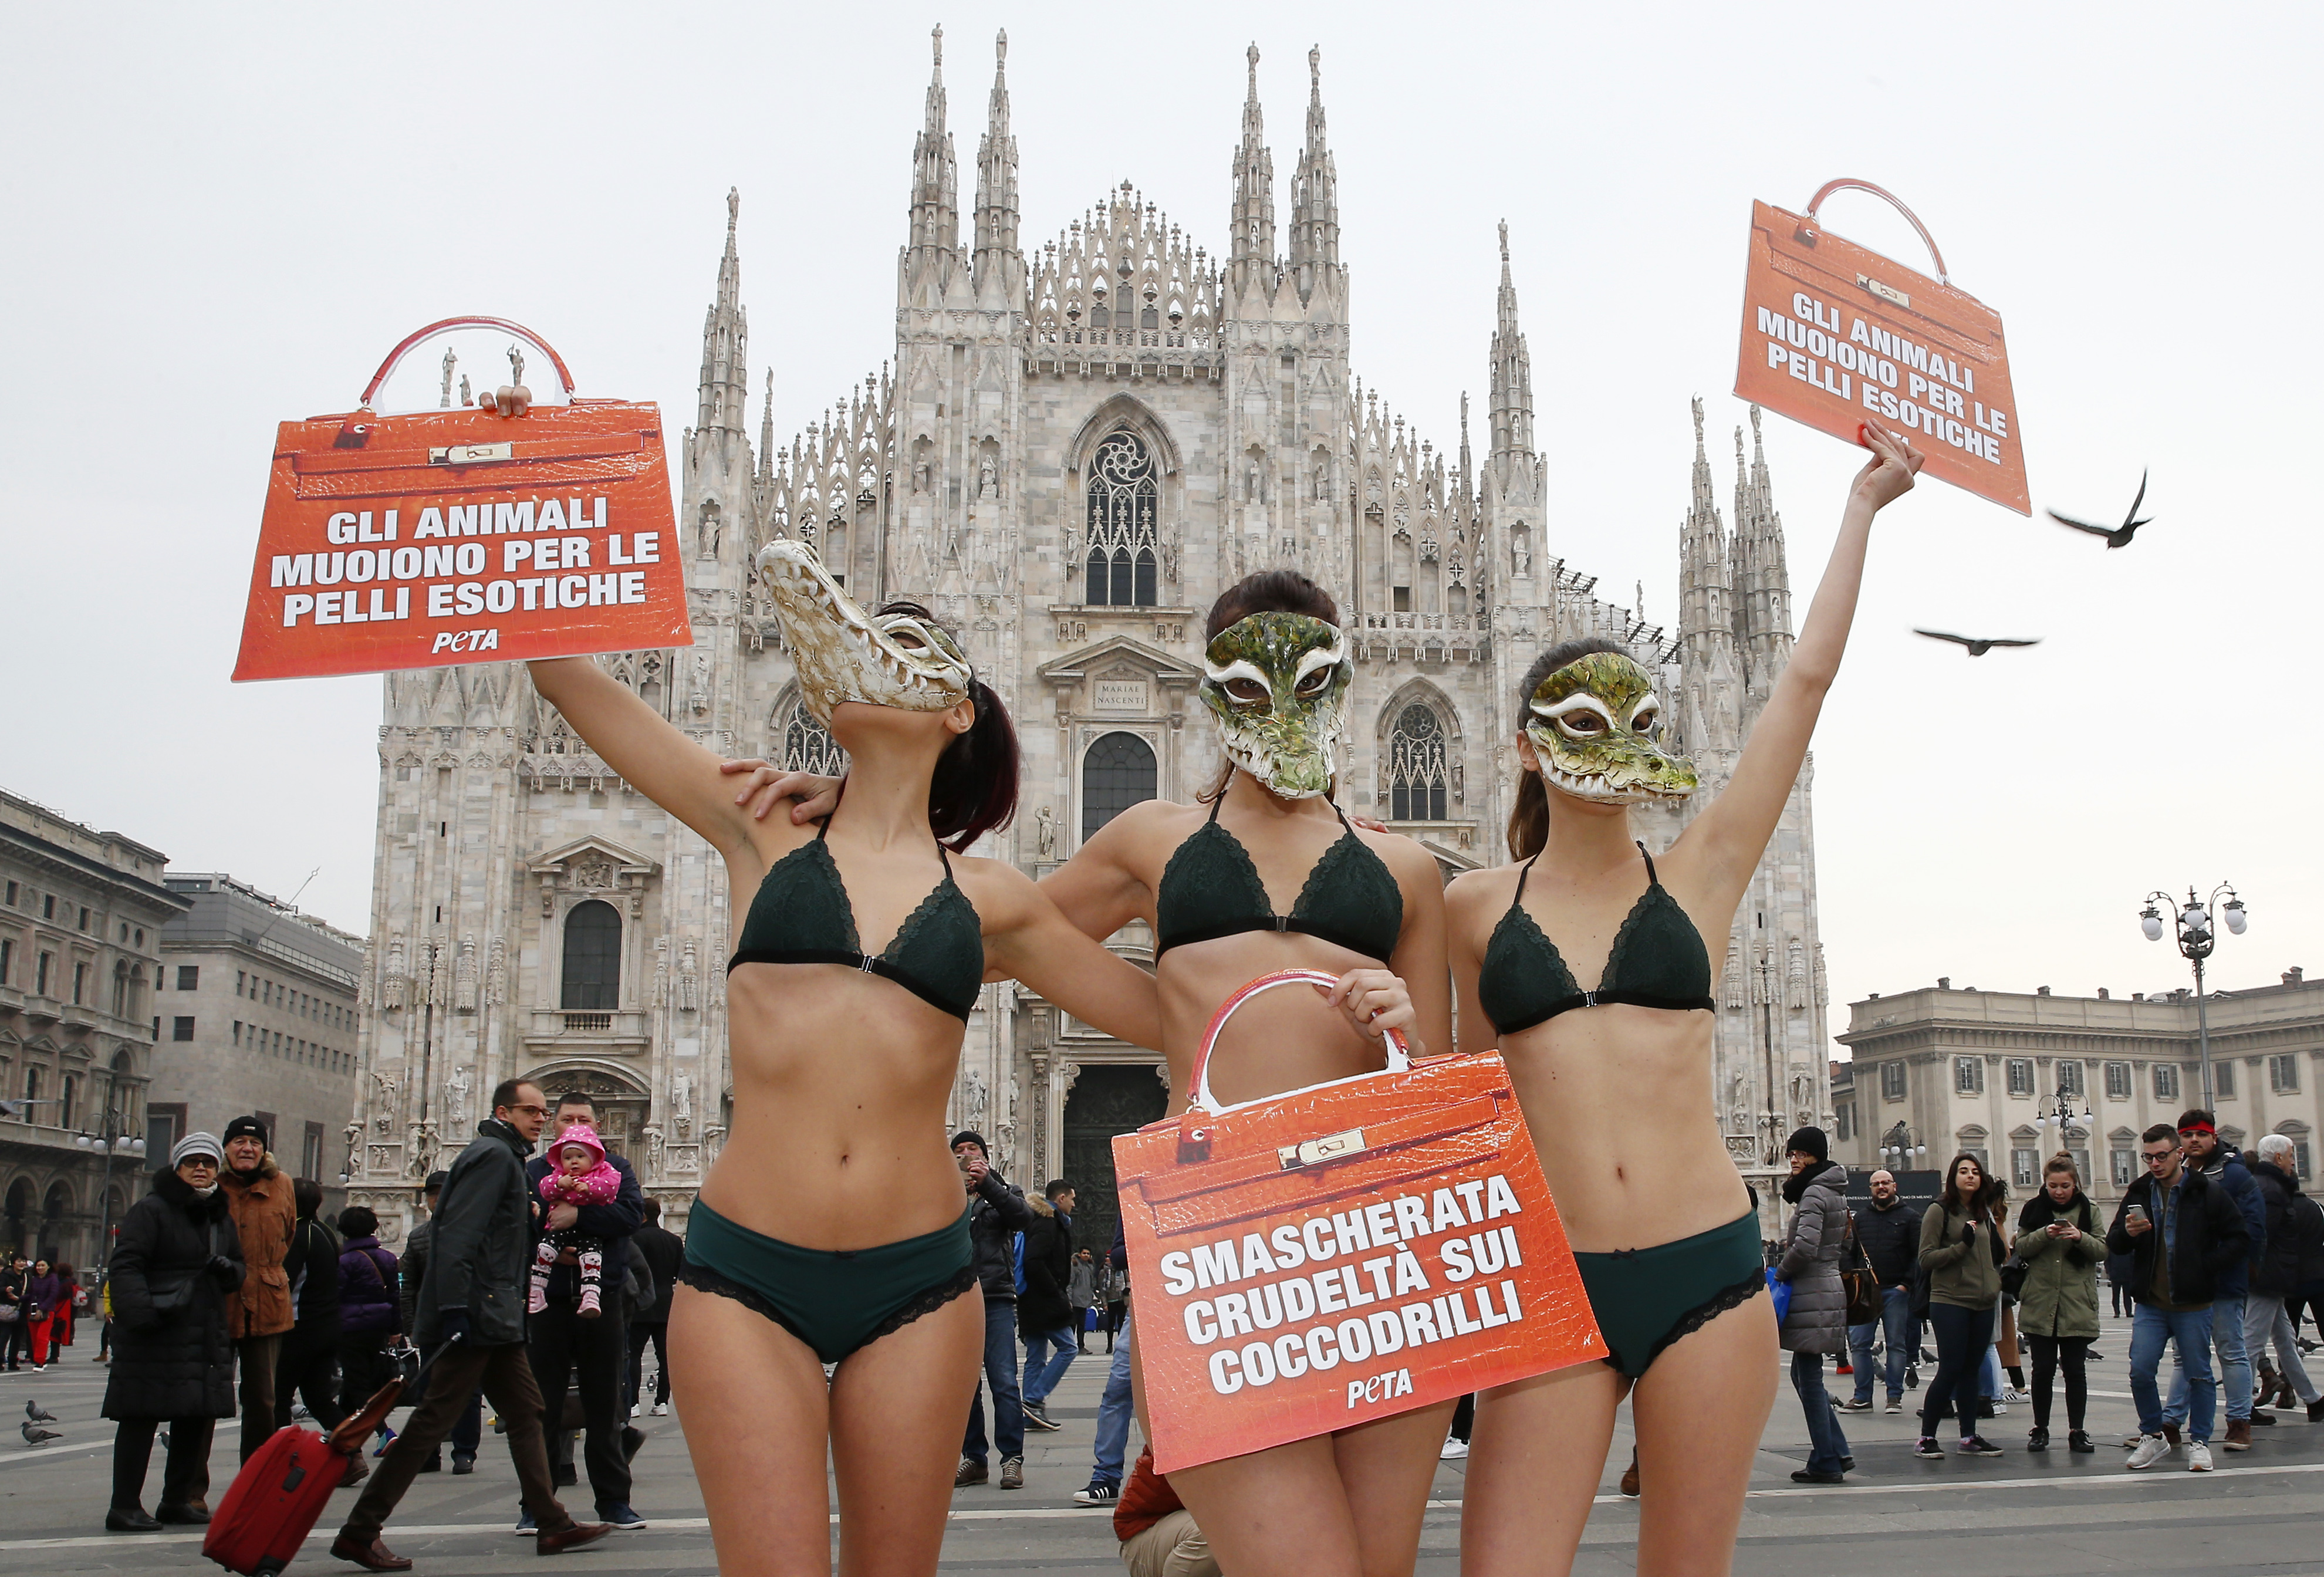 PETA (People for the Ethical Treatment of Animals) activists wear crocodile masks and hold up bag-shaped cards with writing reading in Italian "Animals die for exotic skins" and "Uncovered cruelty on crocodiles", during a demonstration against the use of crocodile skins ahead of Milan's Fashion Week, in Milan's Duomo Square, Italy, Tuesday, Feb. 21, 2017. Milan Fashion Week opens Wednesday. (AP Photo/Antonio Calanni)